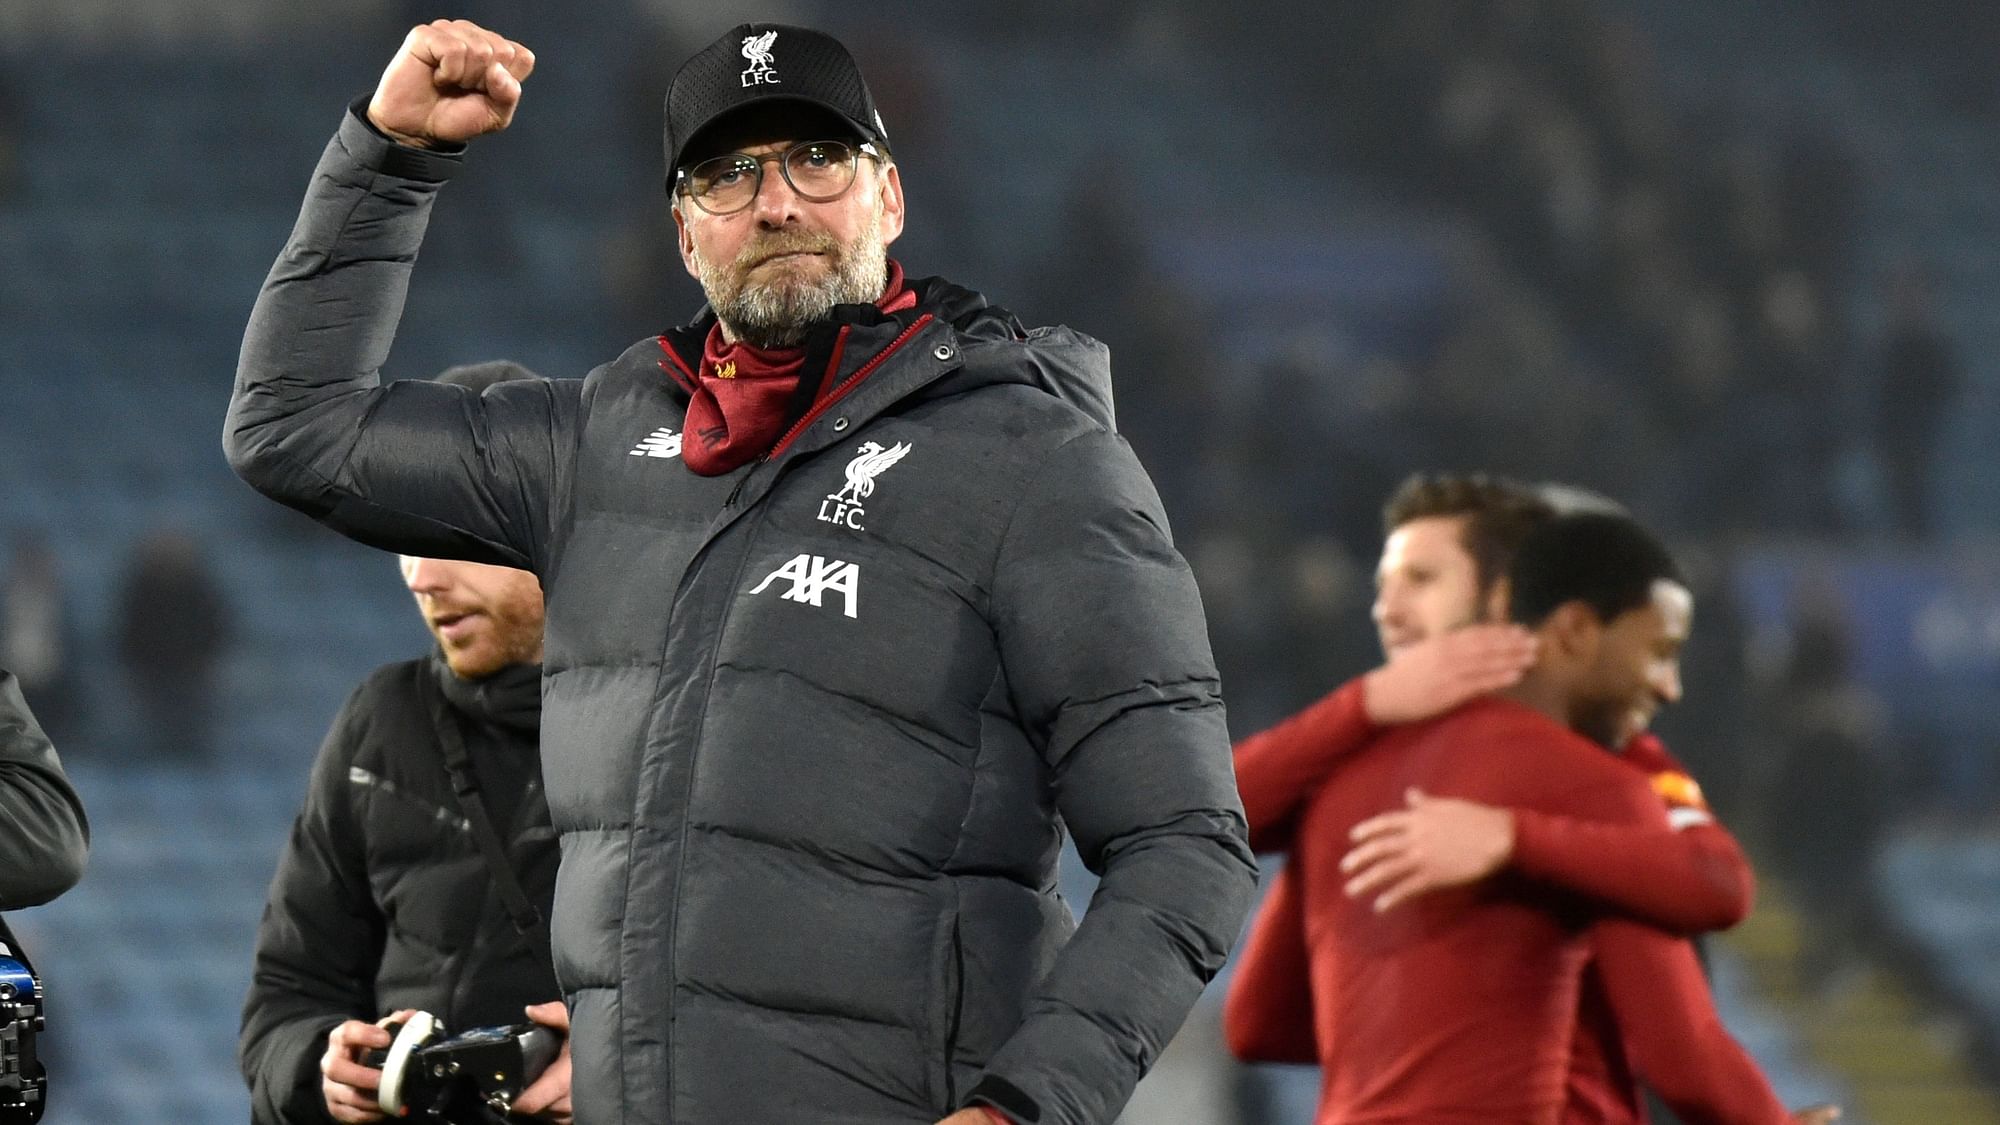 Jurgen Klopp hailed “exceptional” Liverpool after they made it an entire calendar year without a Premier League defeat as the runaway leaders beat Sheffield United 2-0 on Thursday, 2 January.